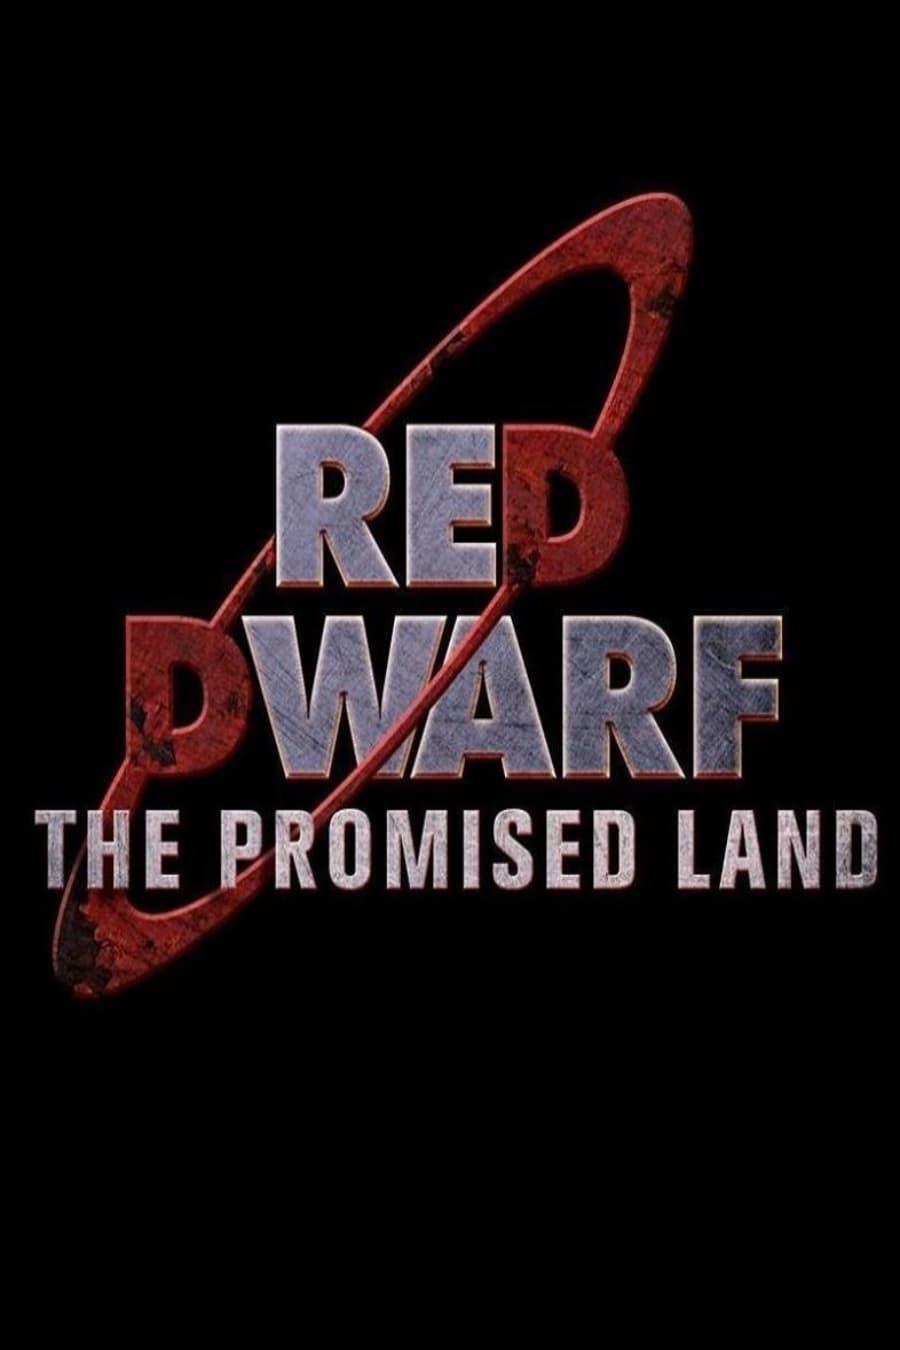 Red Dwarf: The Promised Land poster